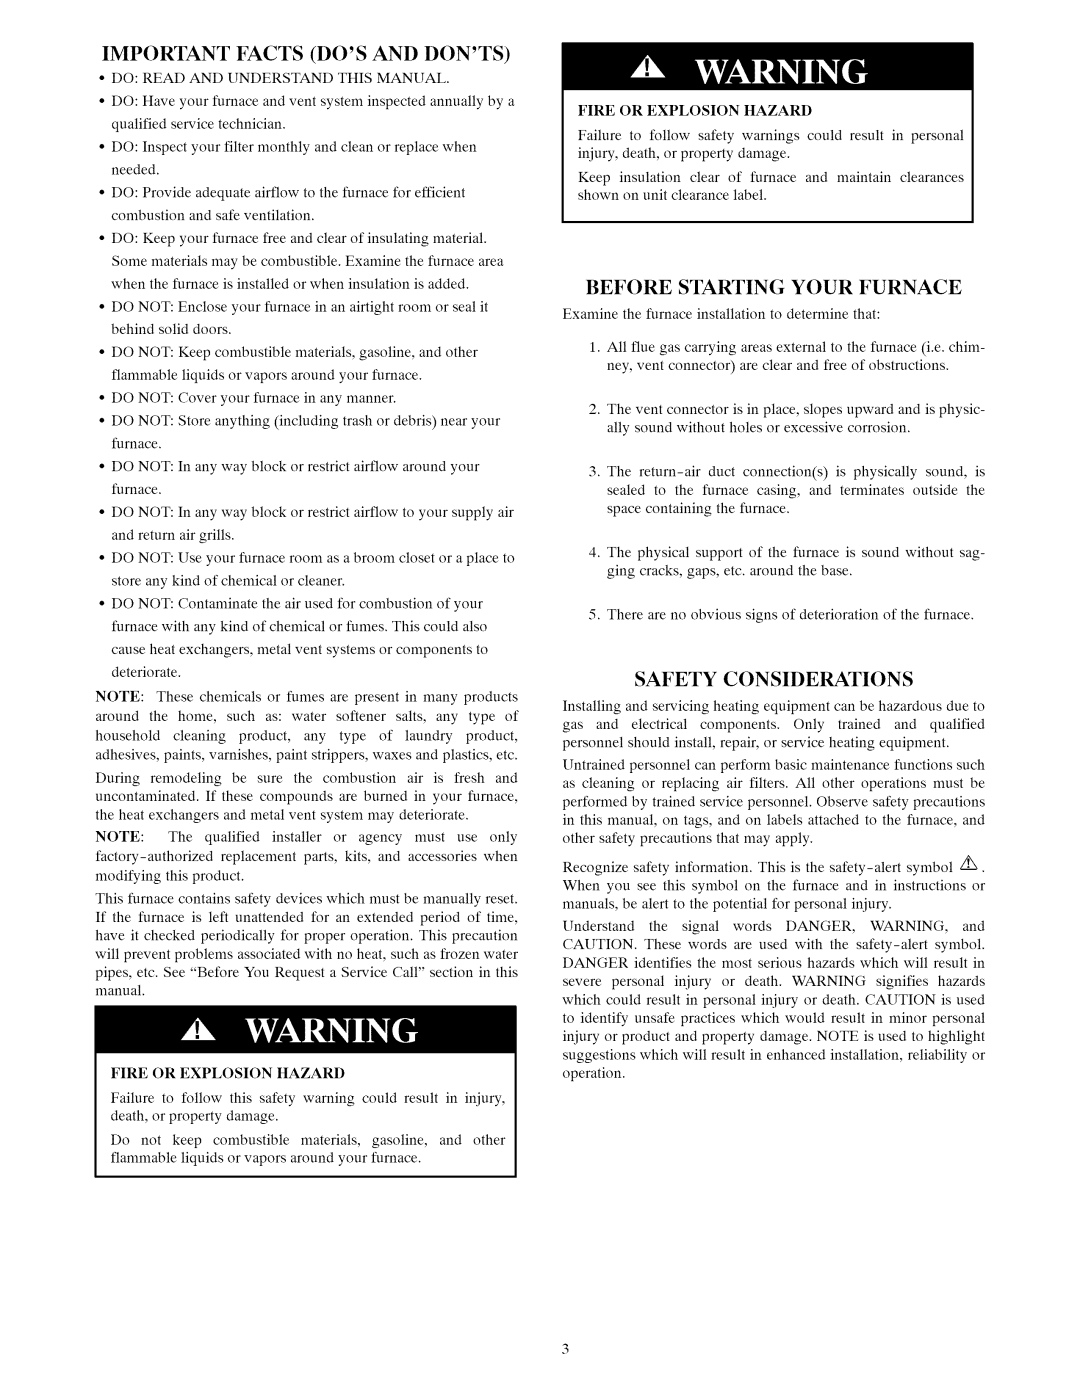 Carrier A10247 owner manual Important Facts Dos And Donts, Before Starting Your Furnace, Safety Considerations 